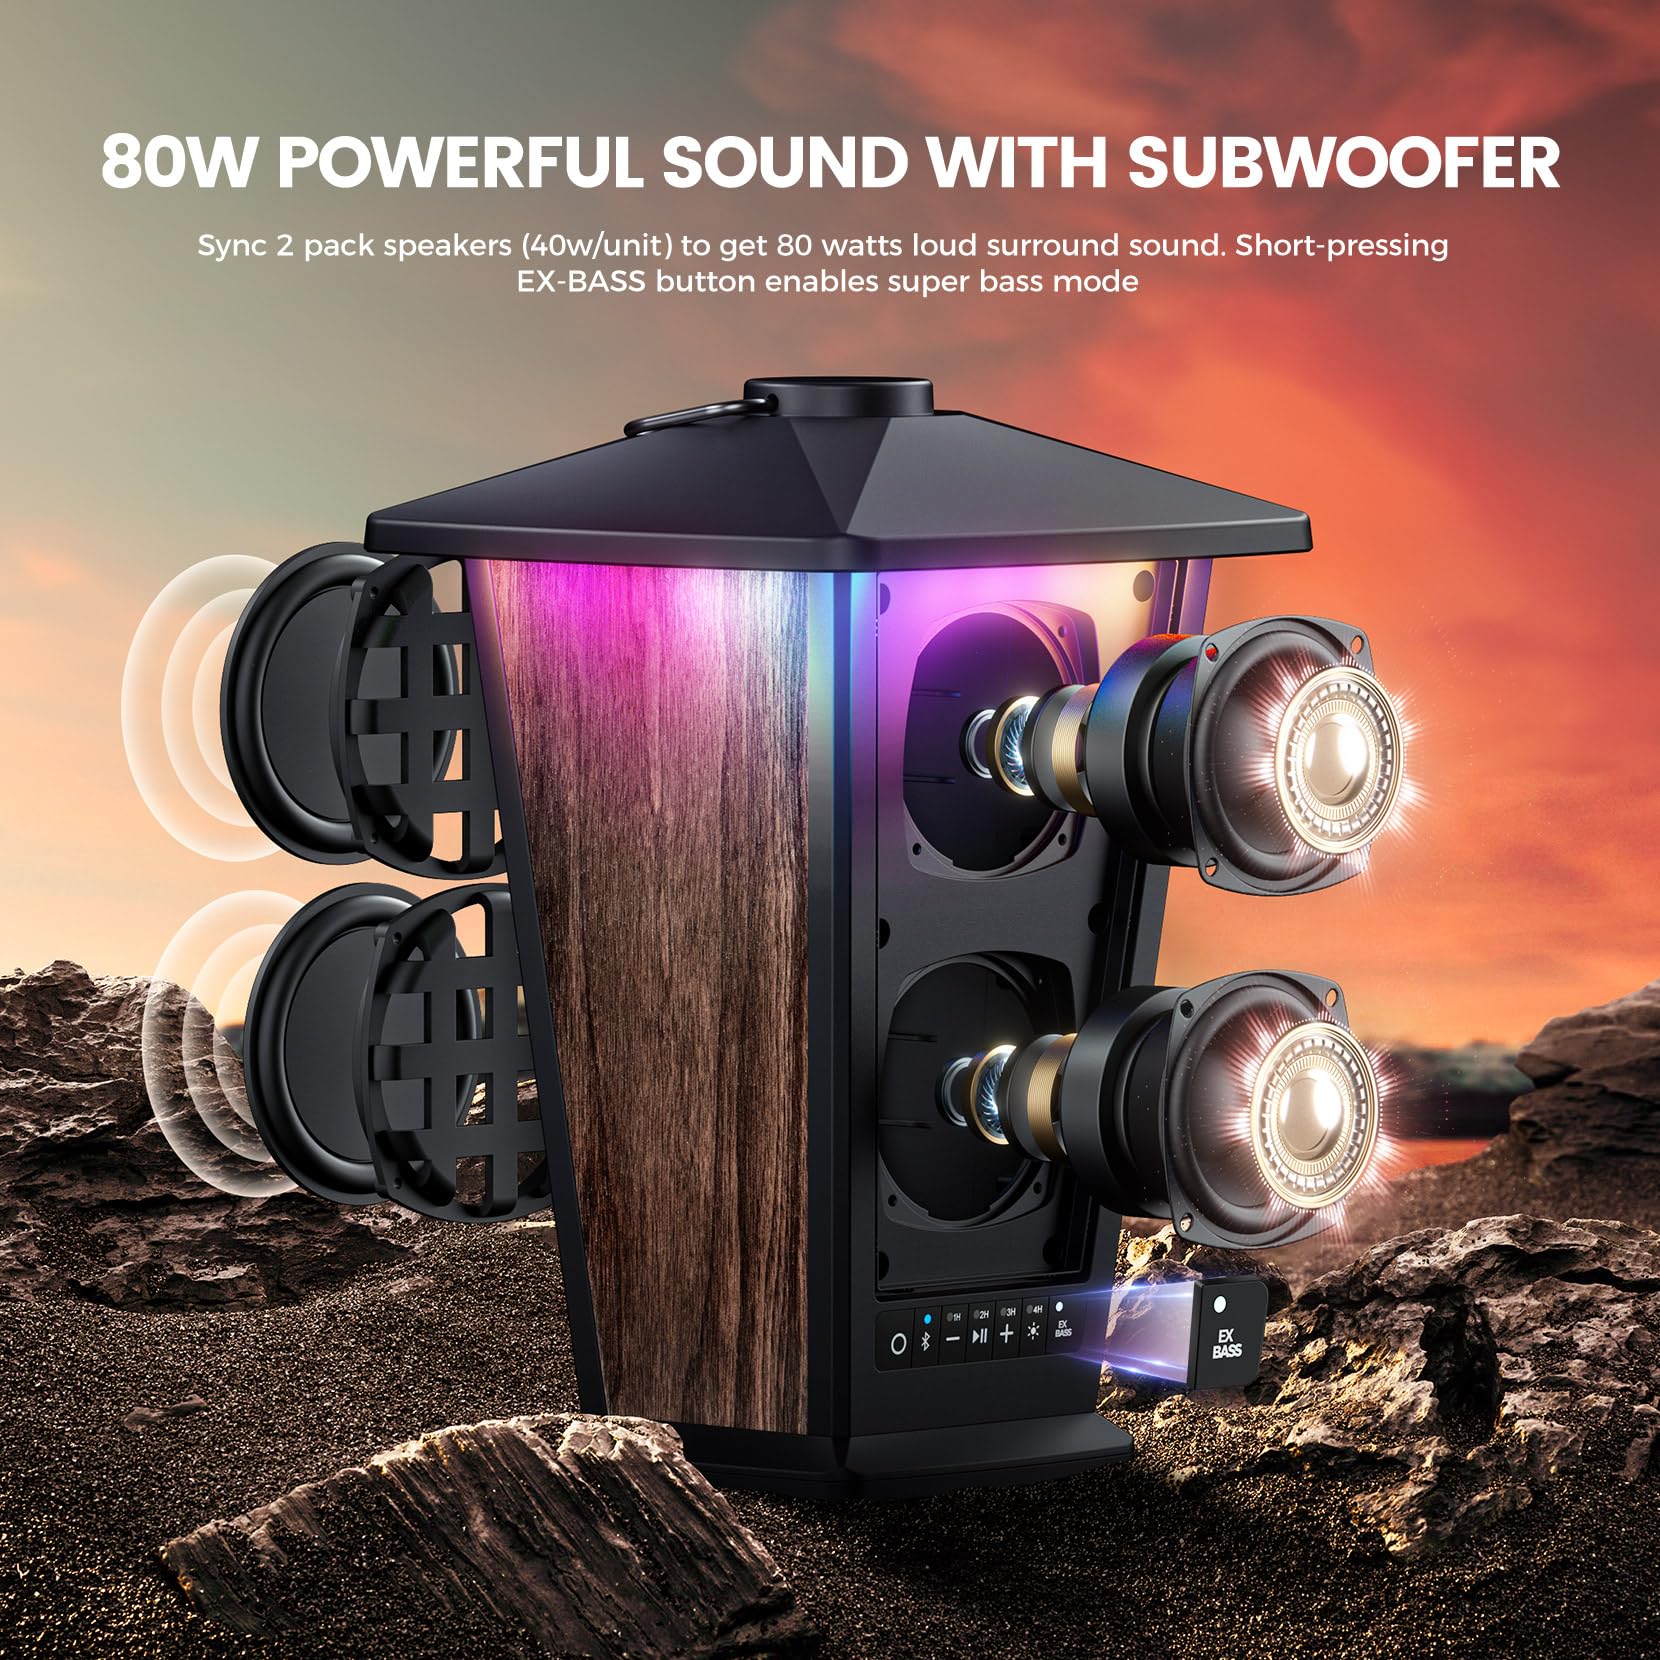 Outdoor Bluetooth Speaker Waterproof, 80W True Wireless Stereo Sound with Punchy Bass, Multi-Connect up to 100 Speakers, 4 Adjustable Modes Beat-Driven Lights, Party/Patio/Pool Side/Porch, 2 Pack